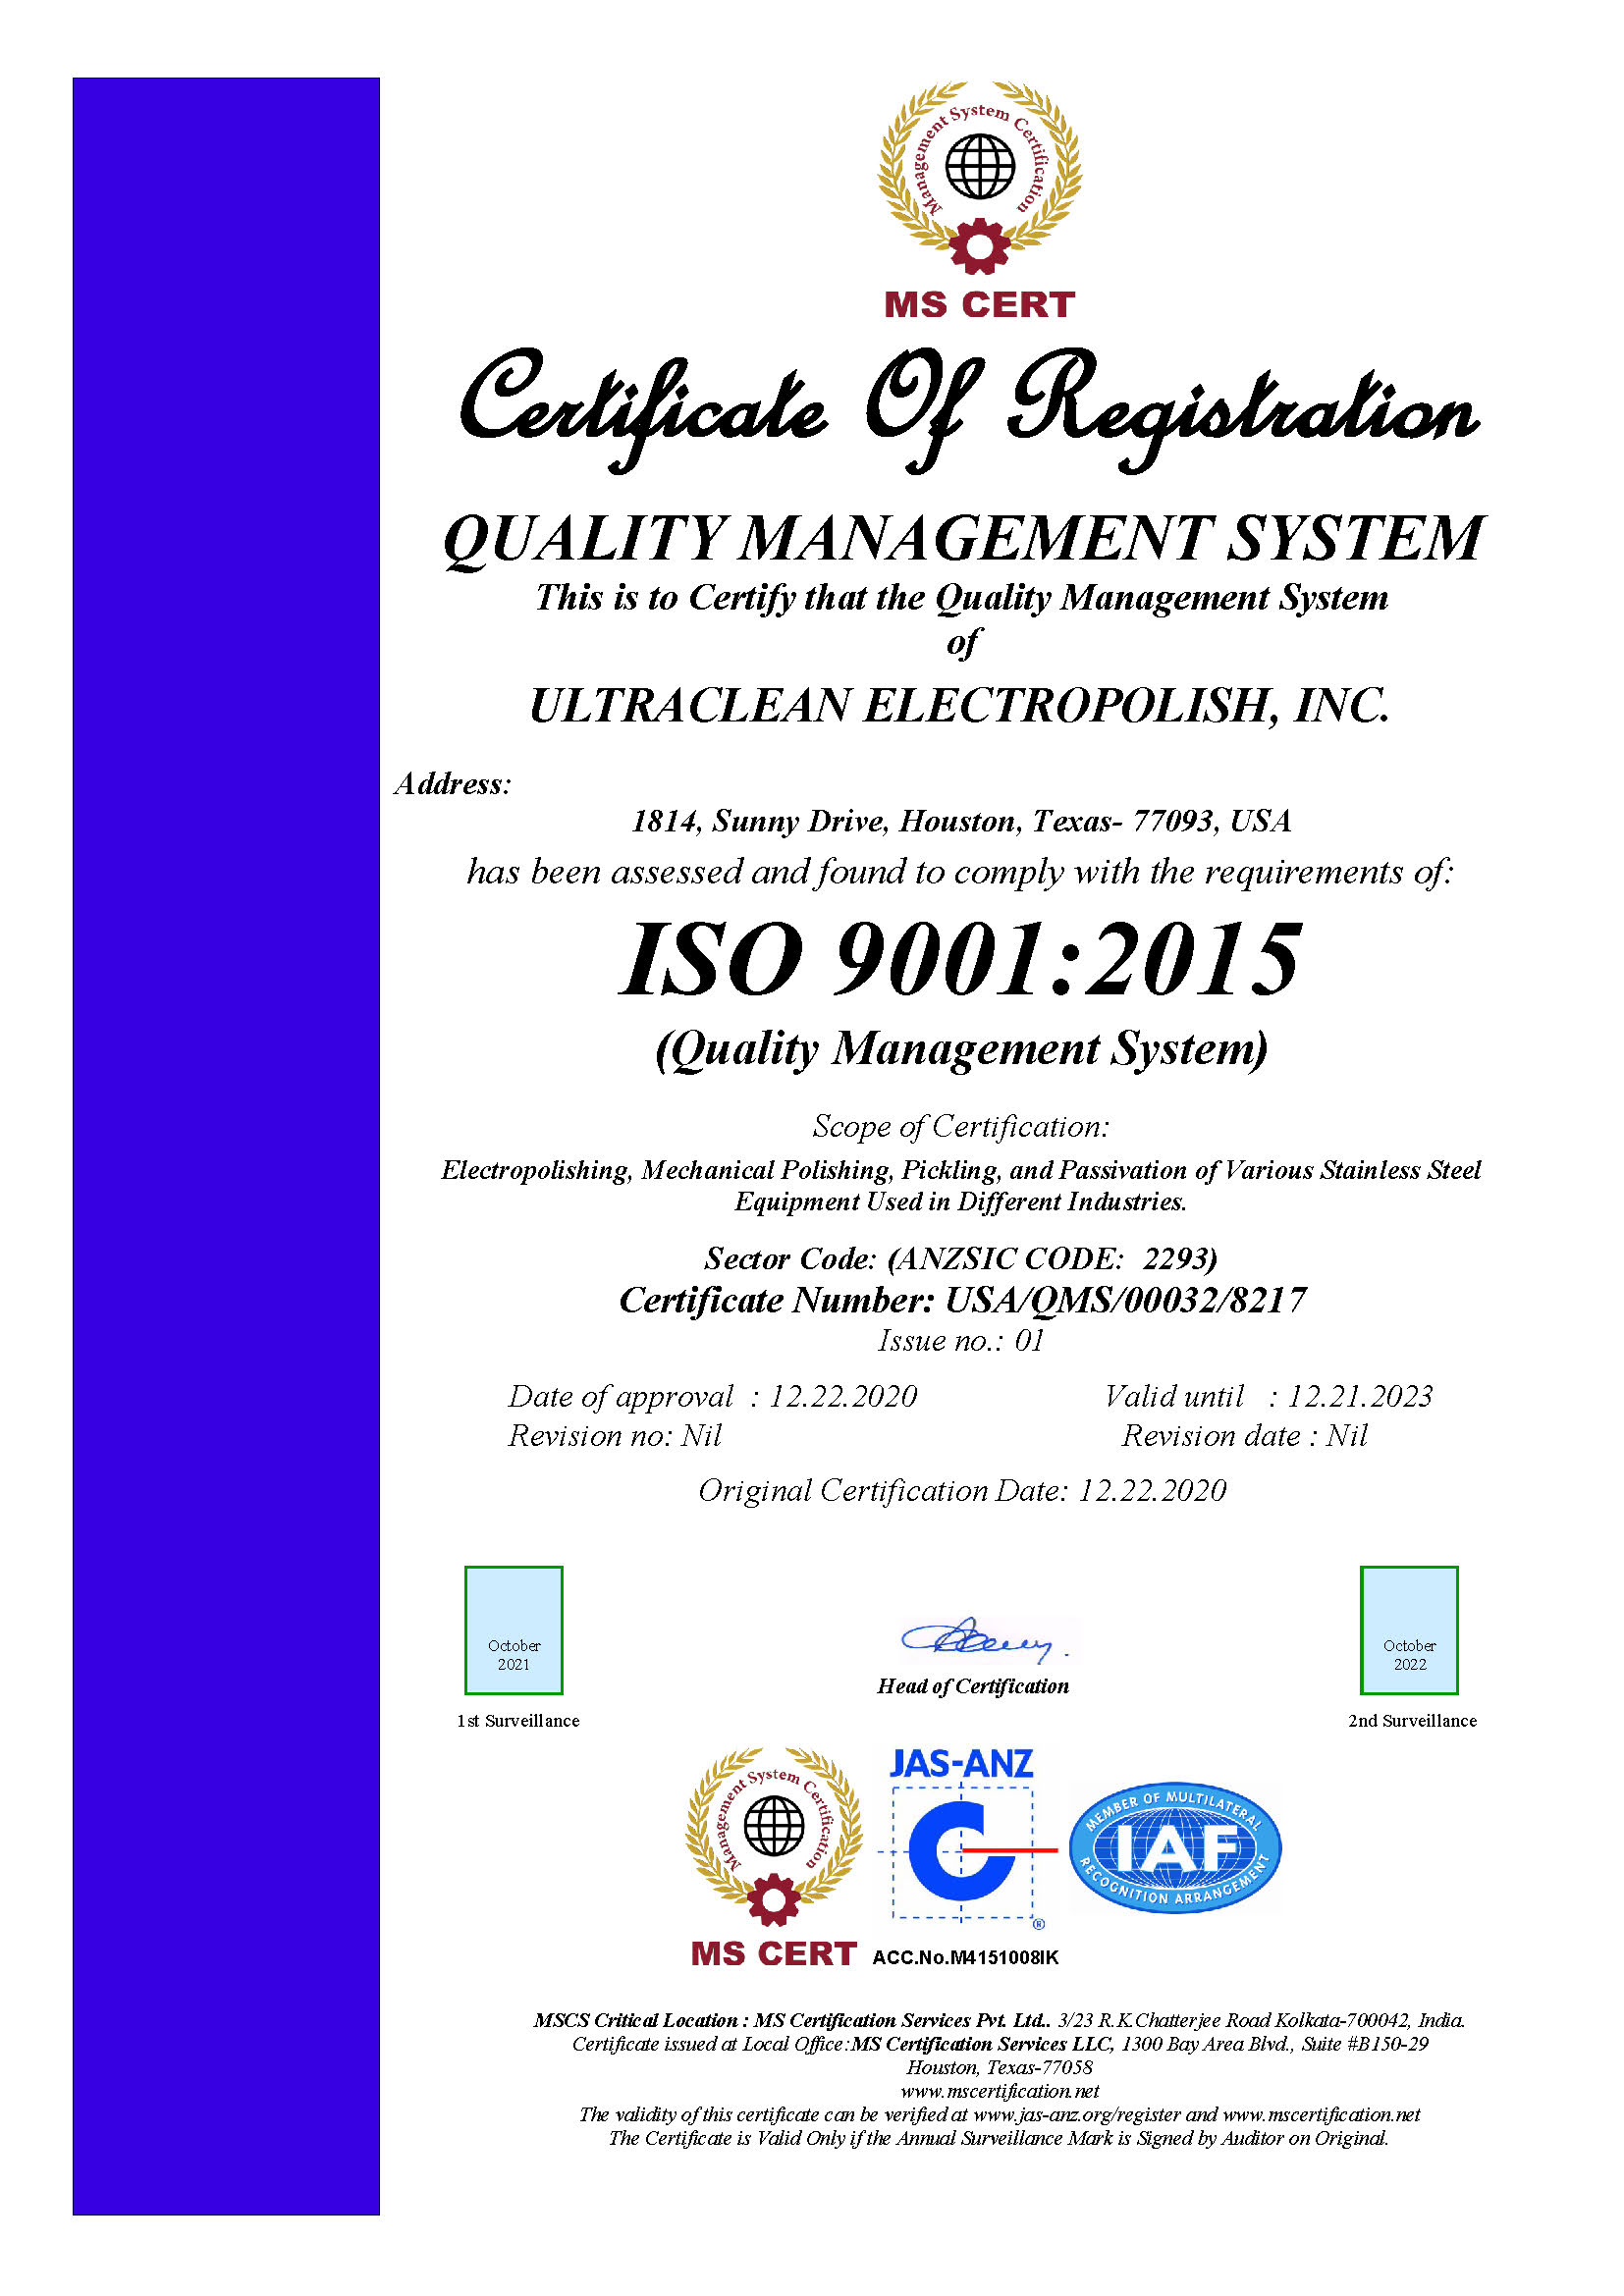 ISO-9001-2015-CERTIFICATE-Ultraclean-electropolish-